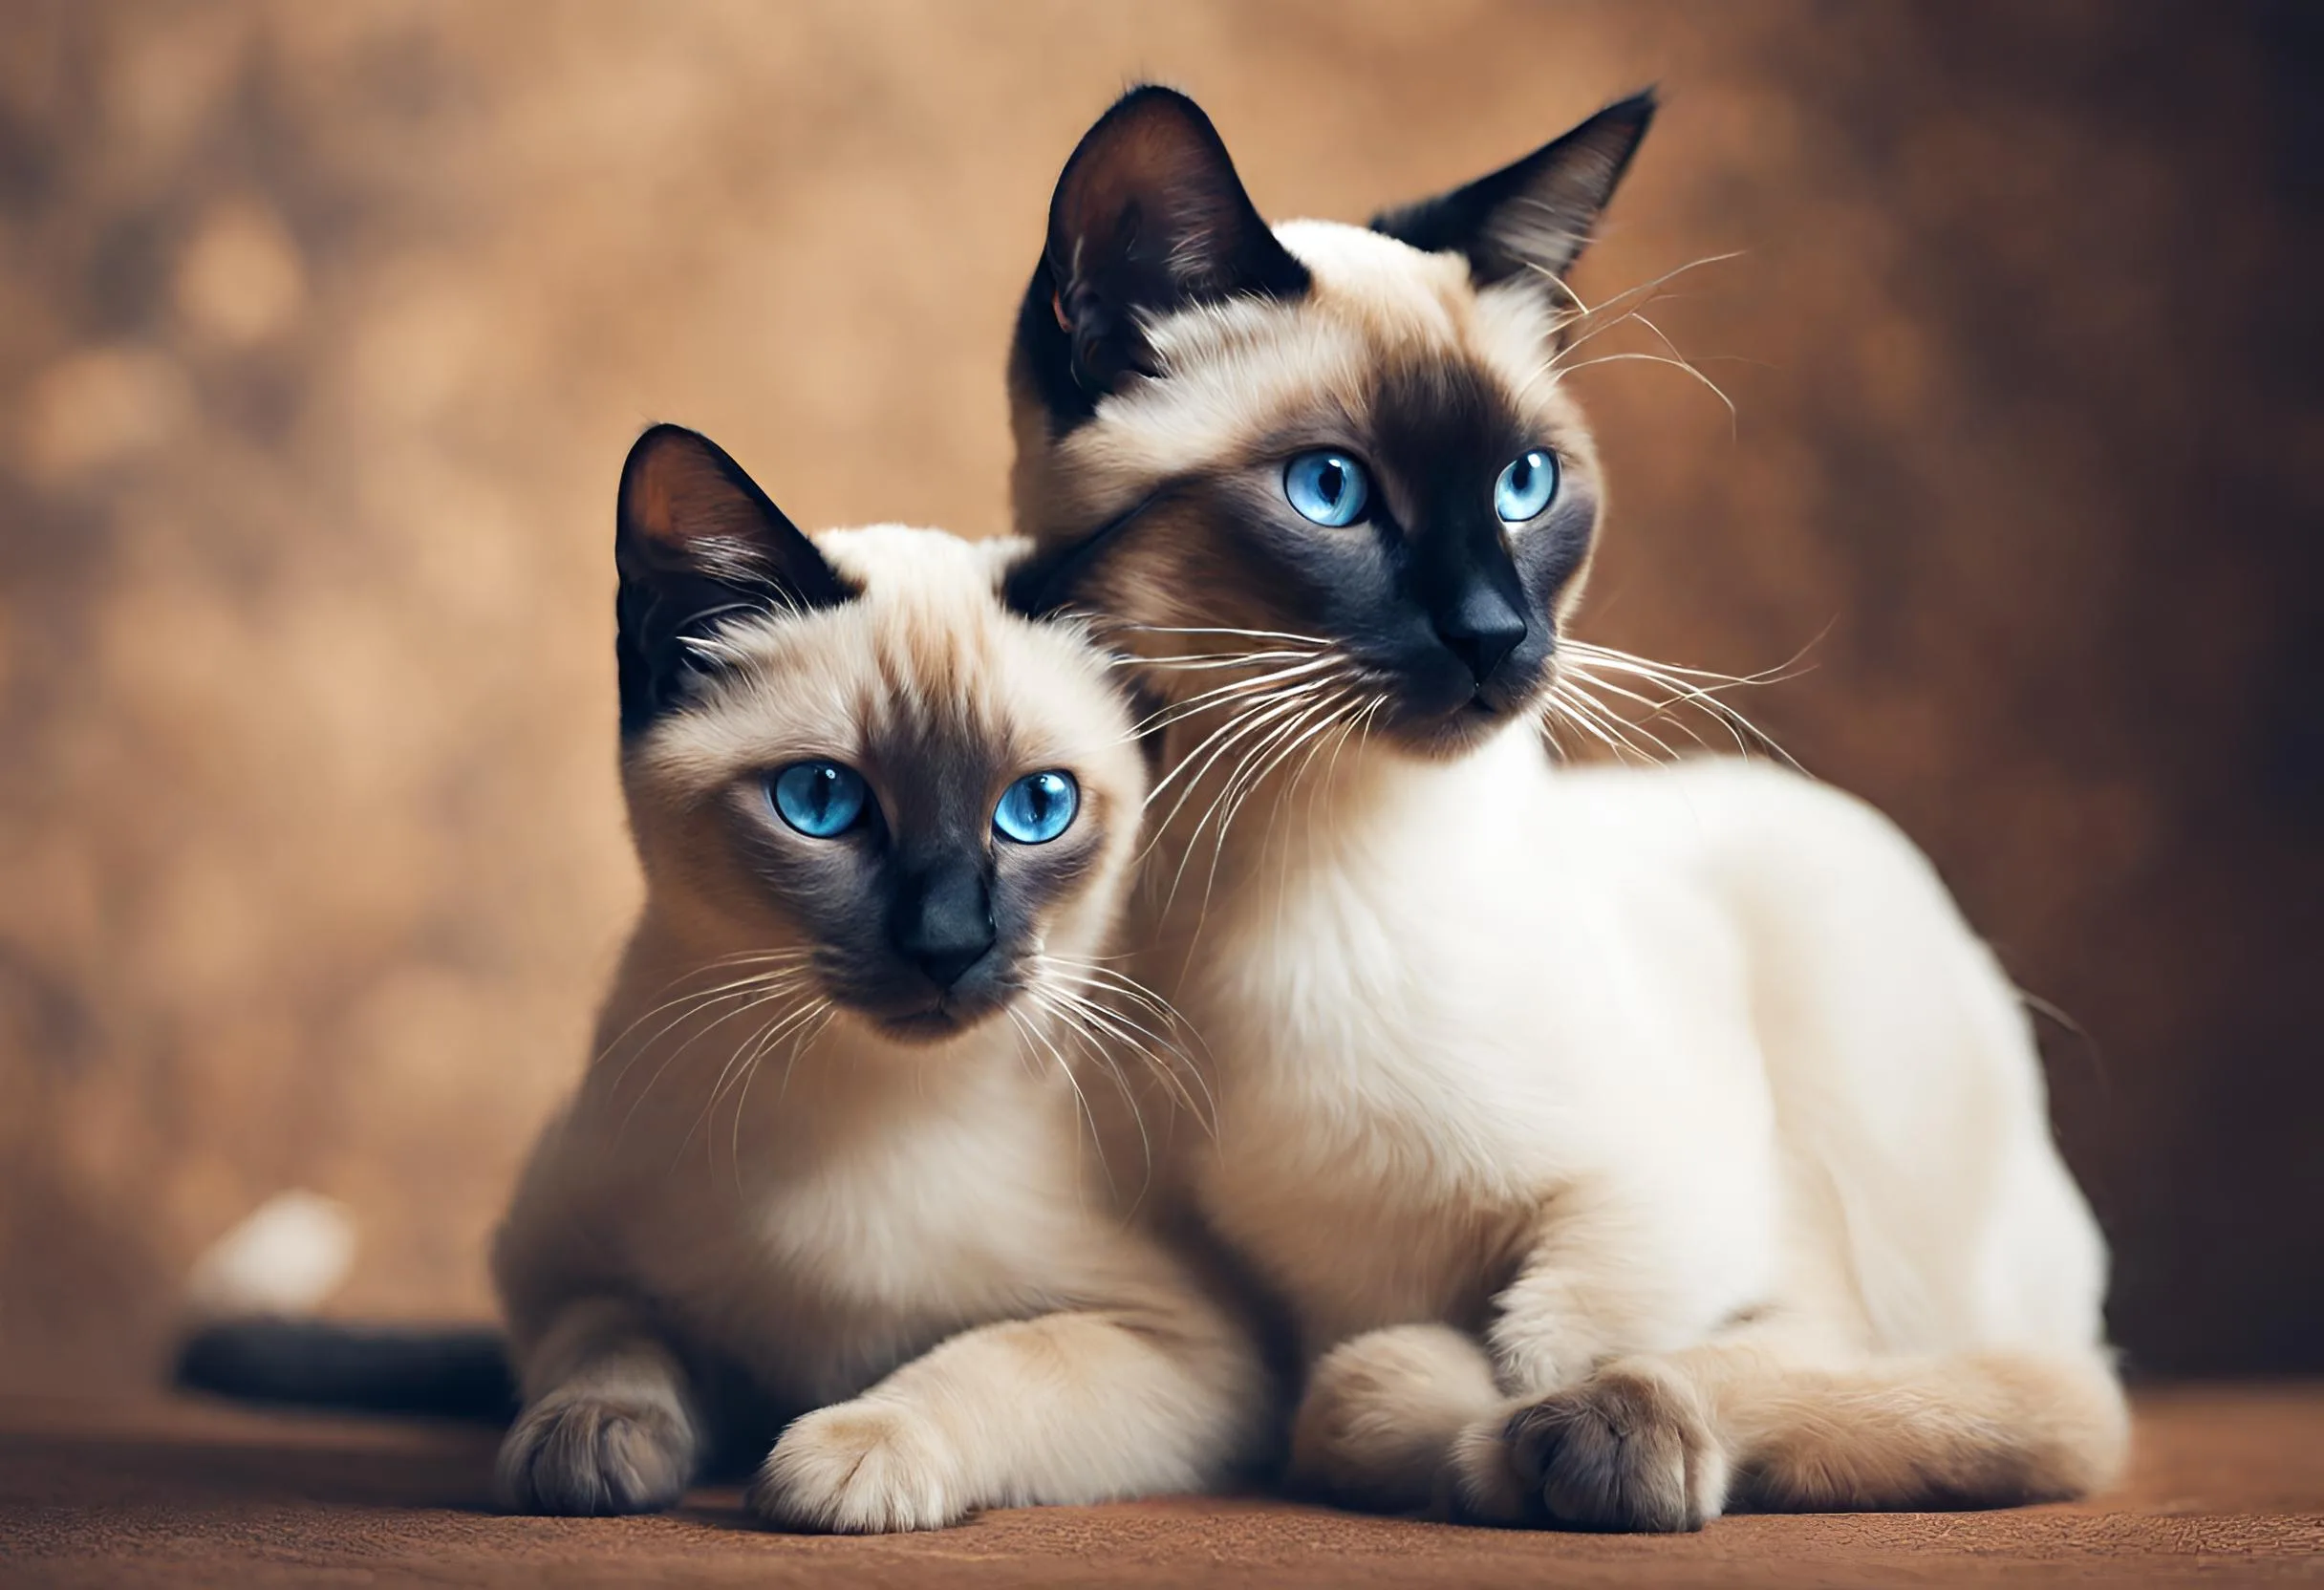 Siamese vs. Other Cat Breeds